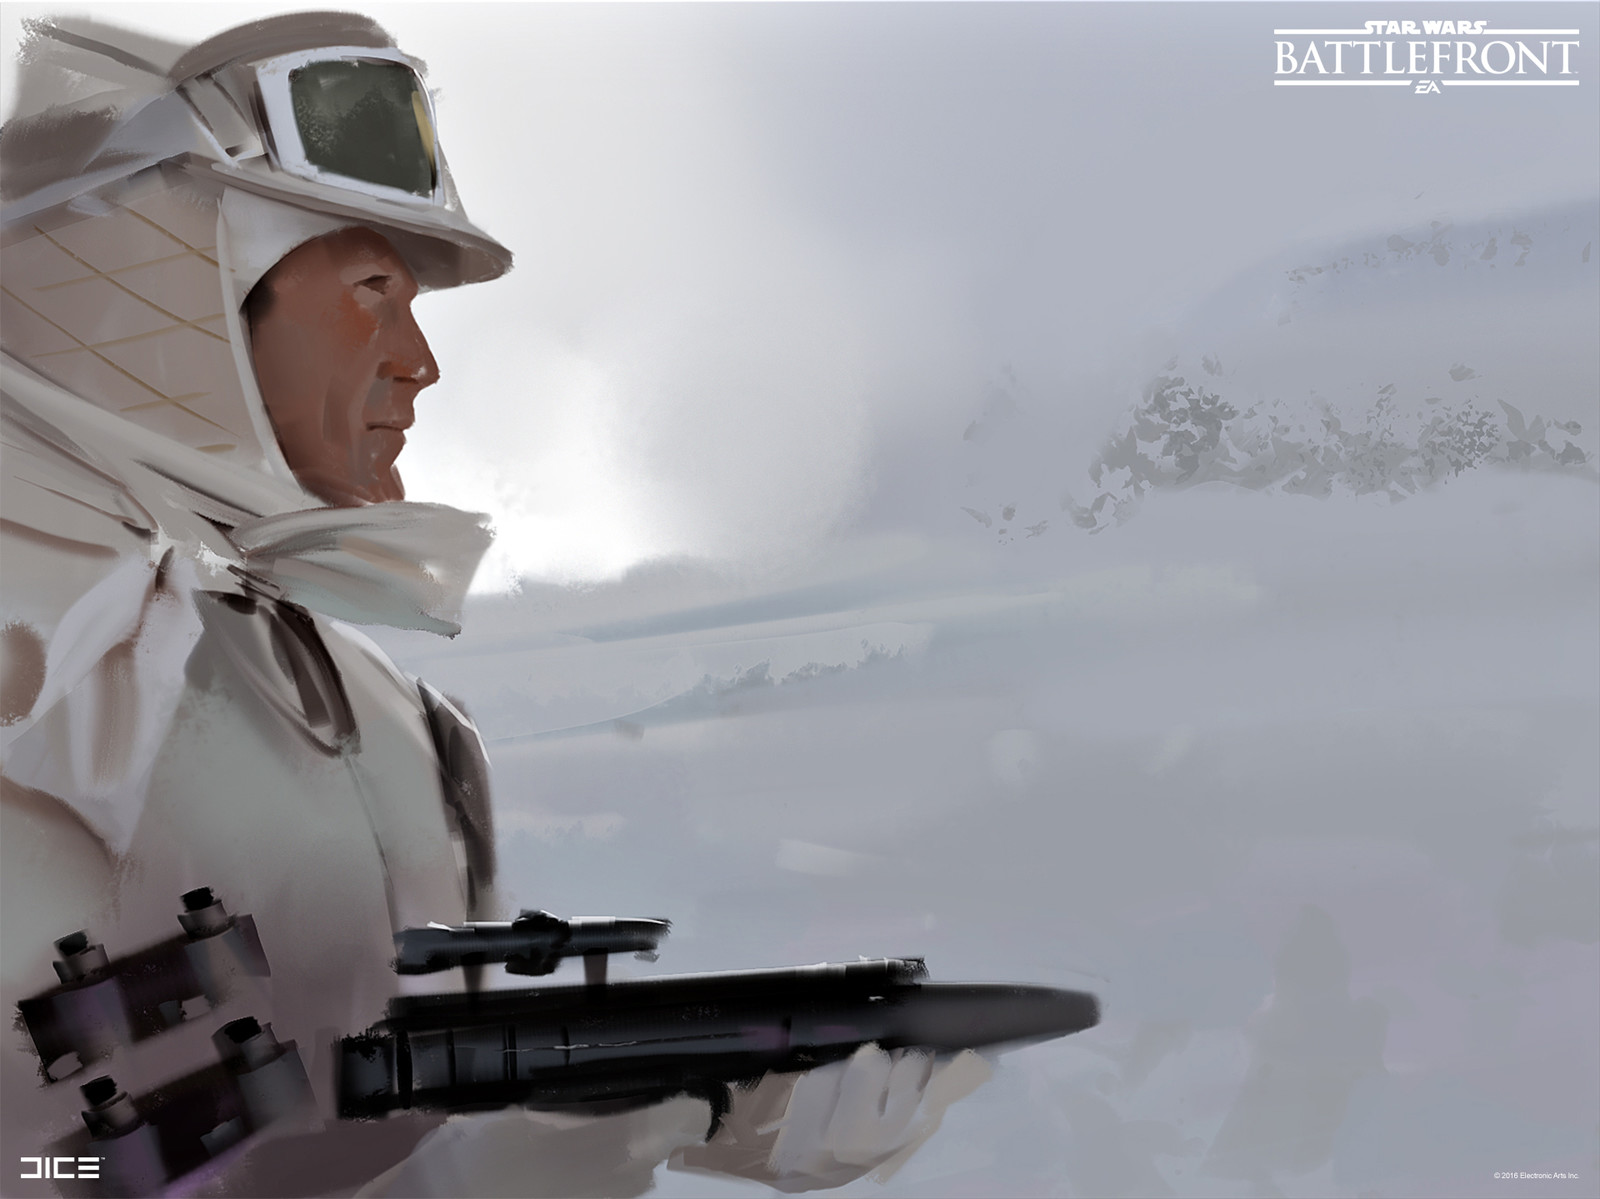 Style study from movie still for the 2015 Star Wars Battlefront game. (2013)